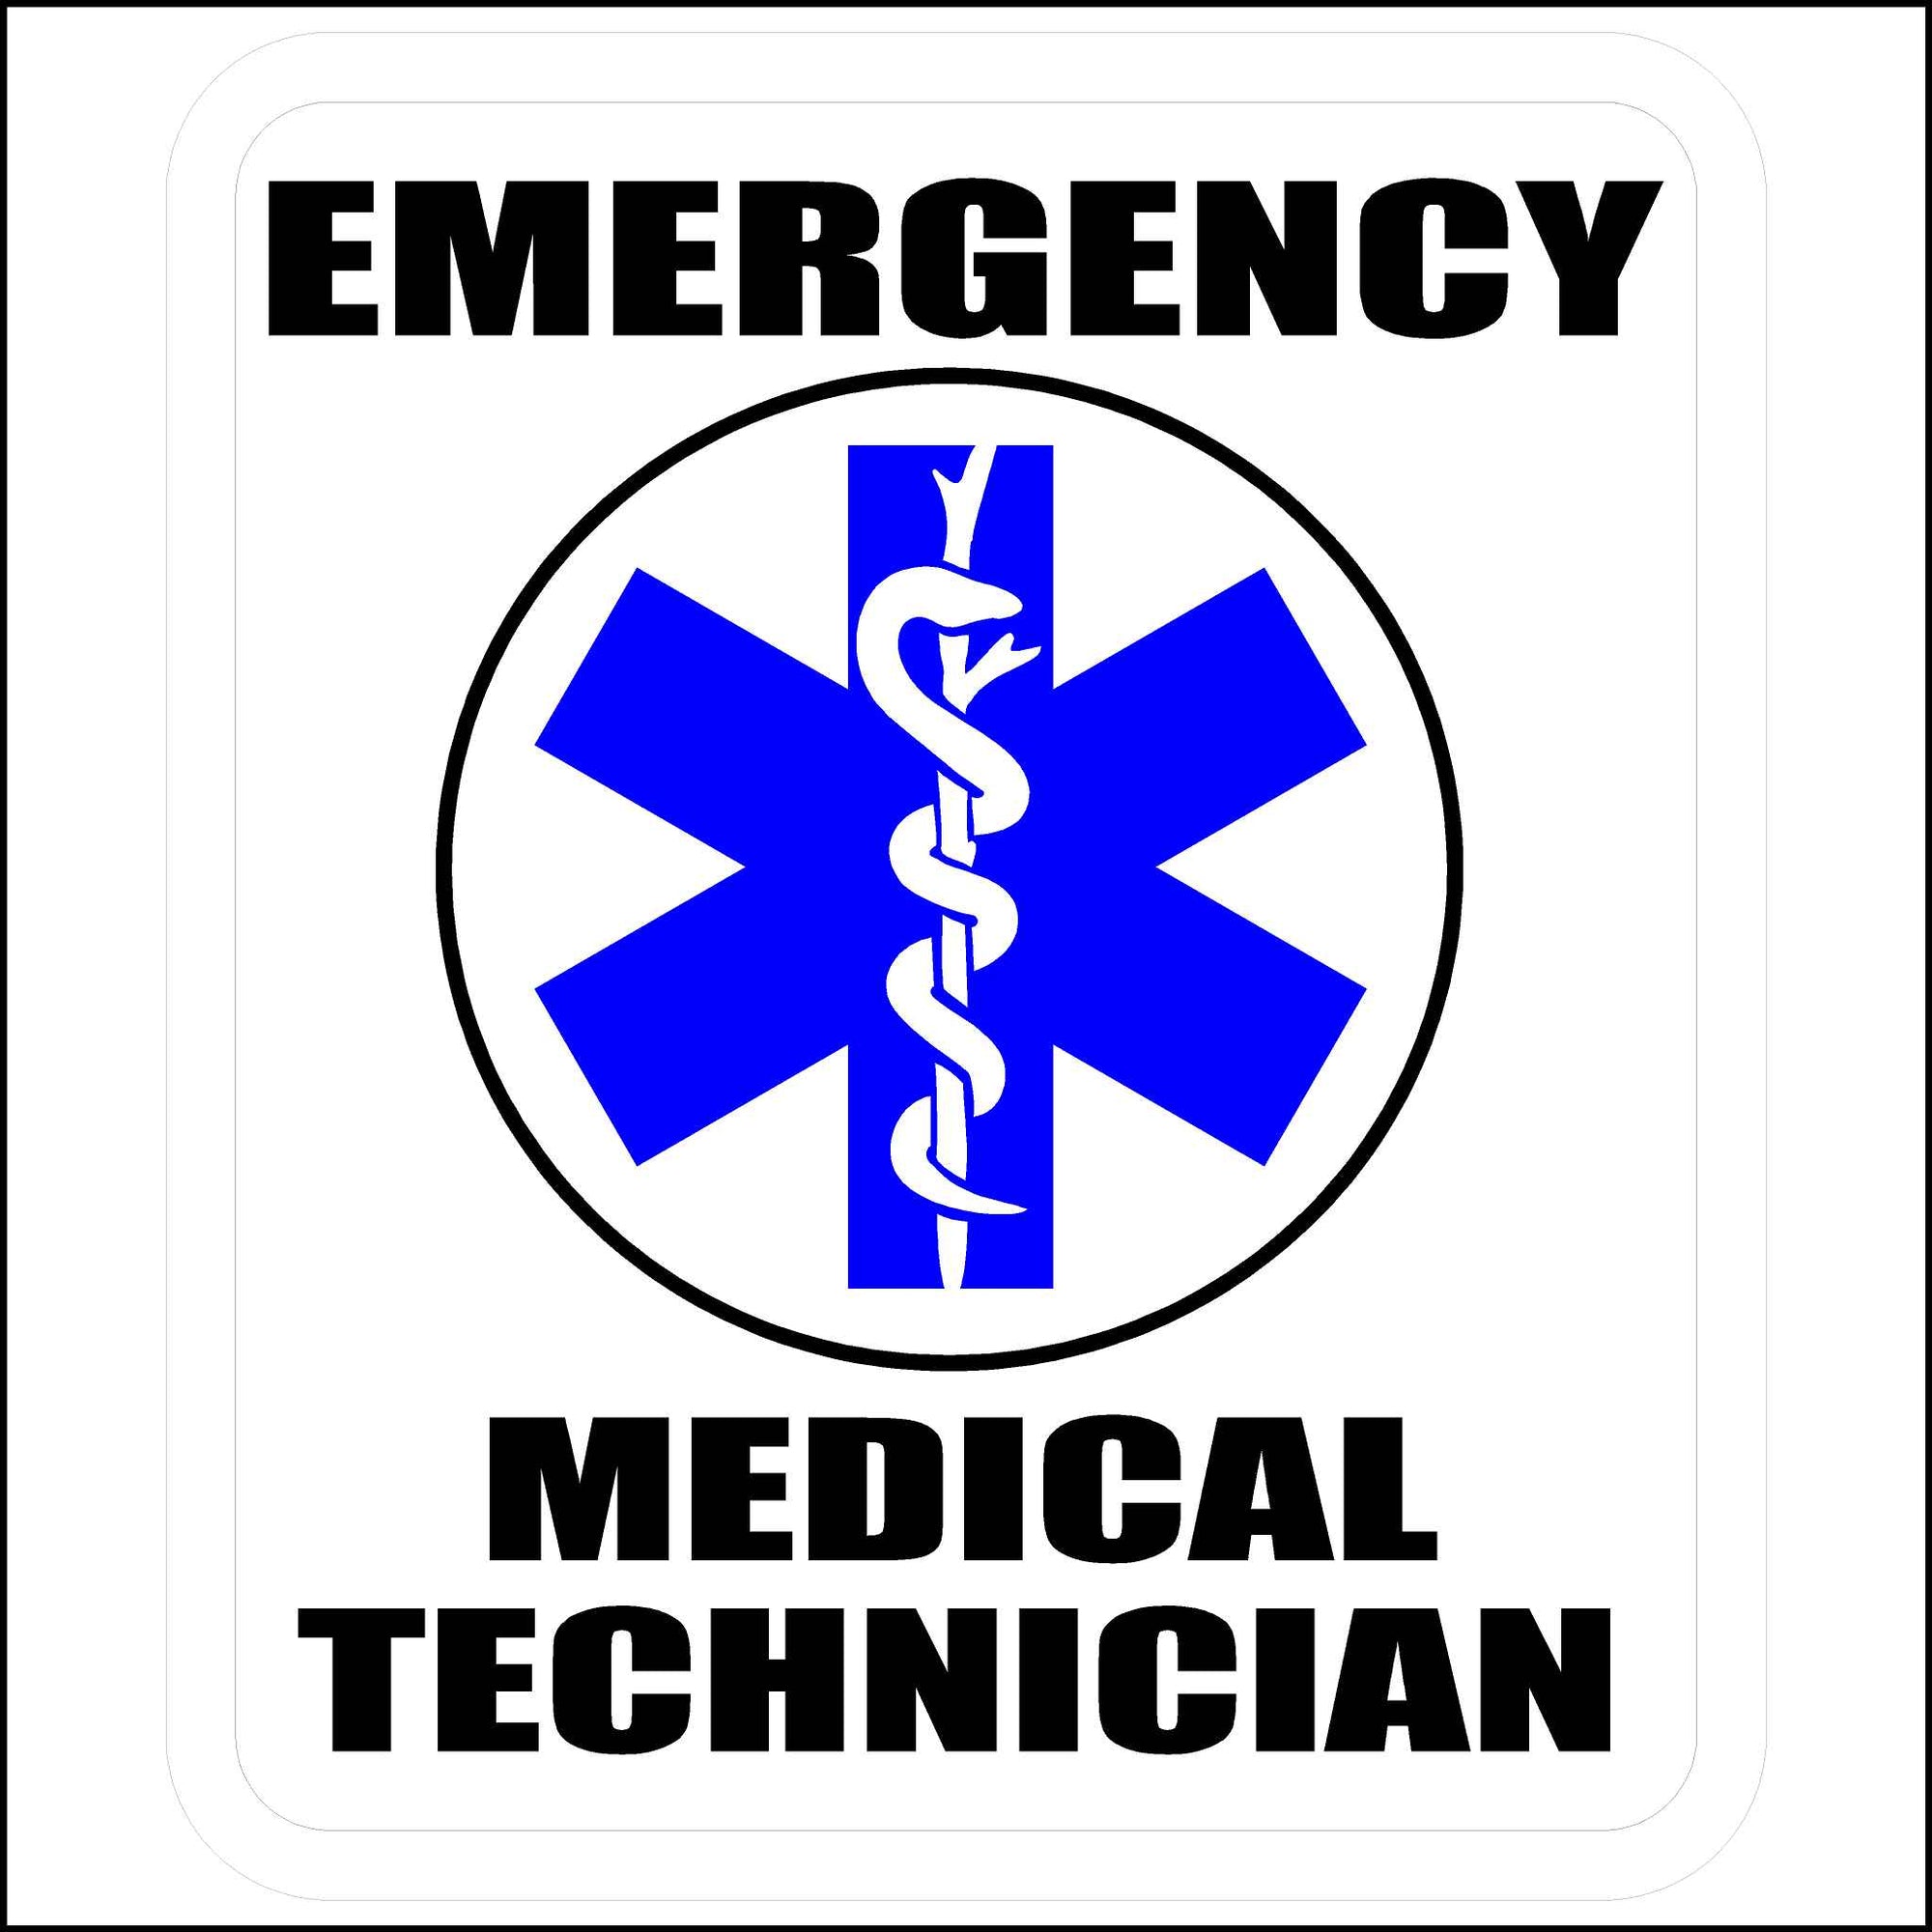 Blue, White, and Black Emergency Medical Technician Hard Hat Sticker.